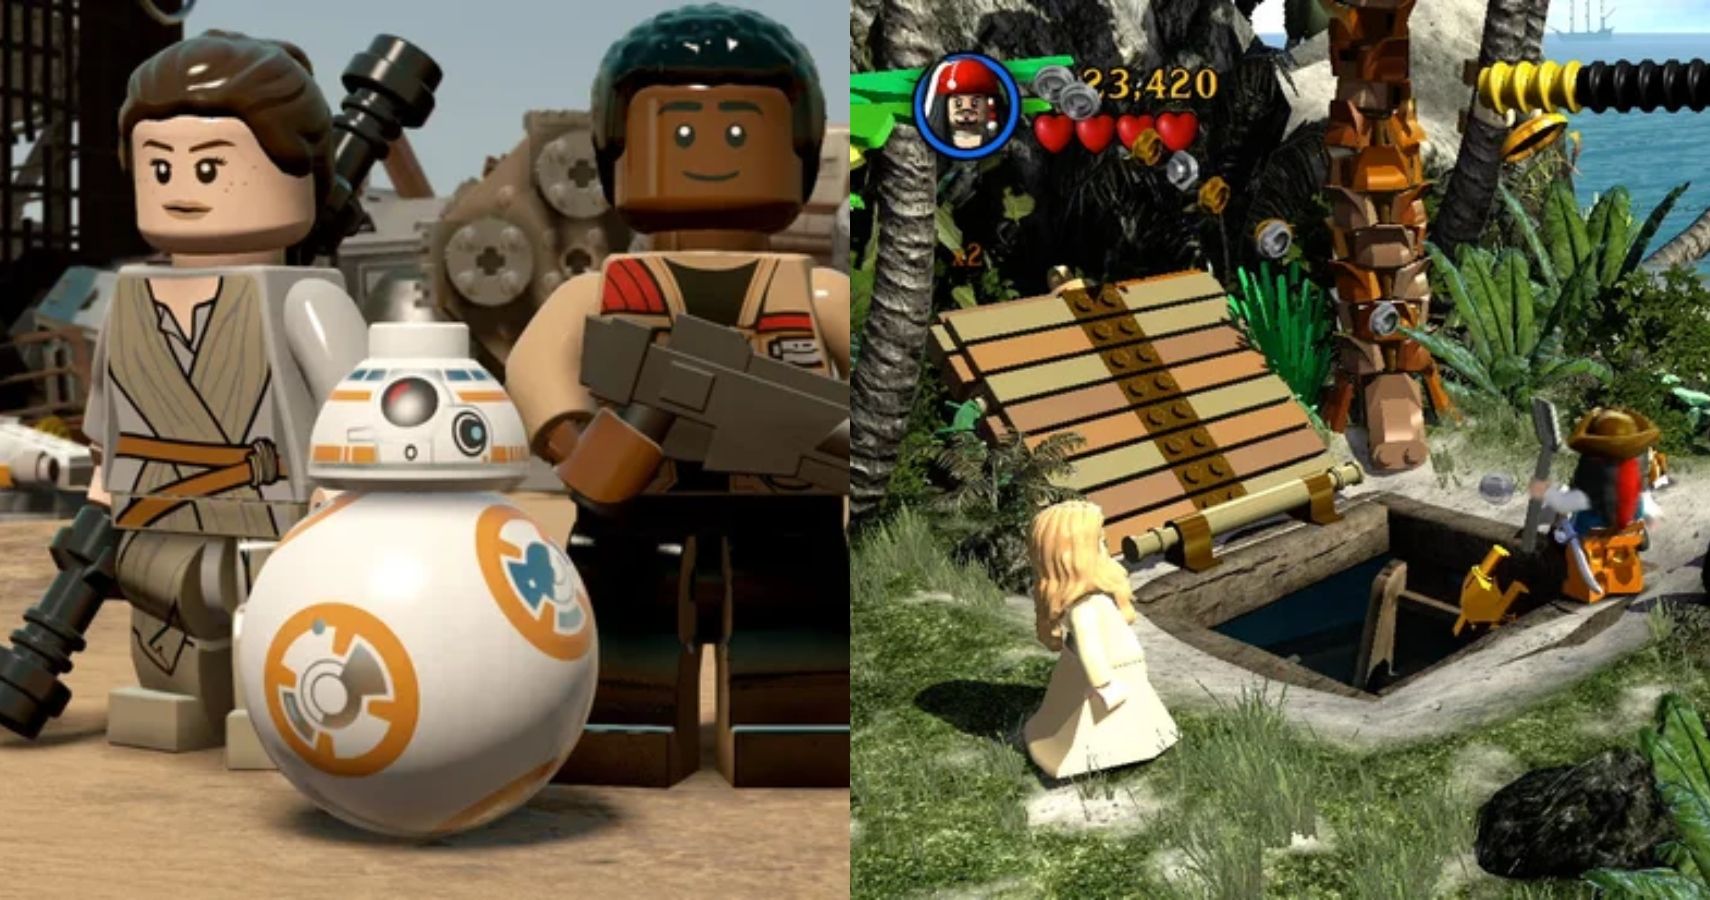 15 Greatest LEGO Games Ever, Ranked